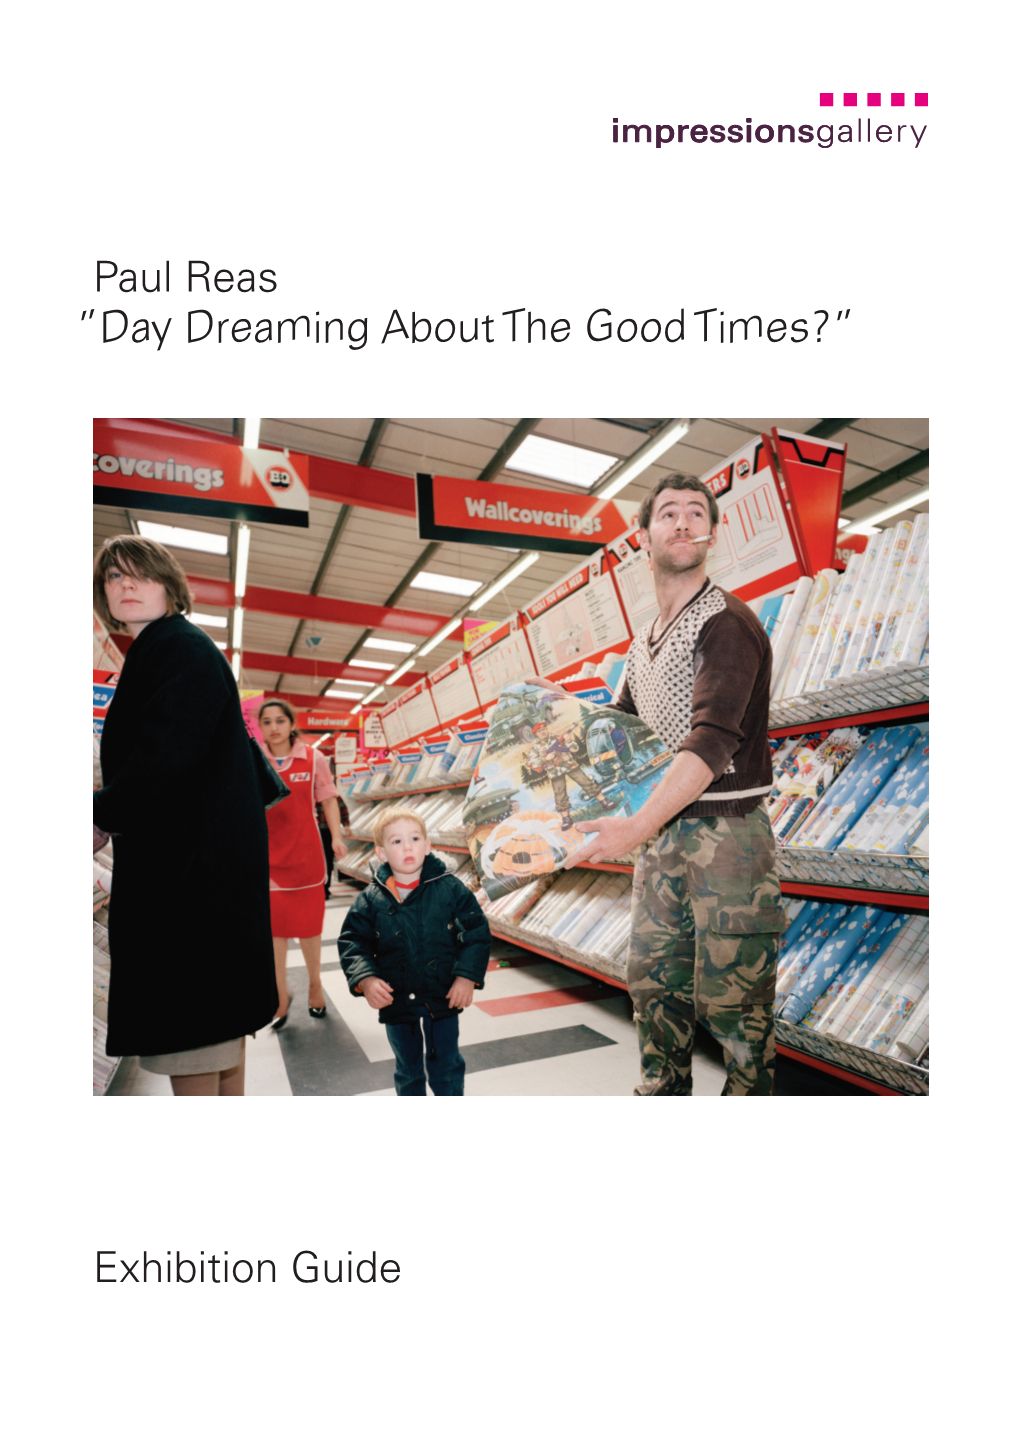 Paul Reas Exhibition Guide ”Day Dreaming About the Good Times?”